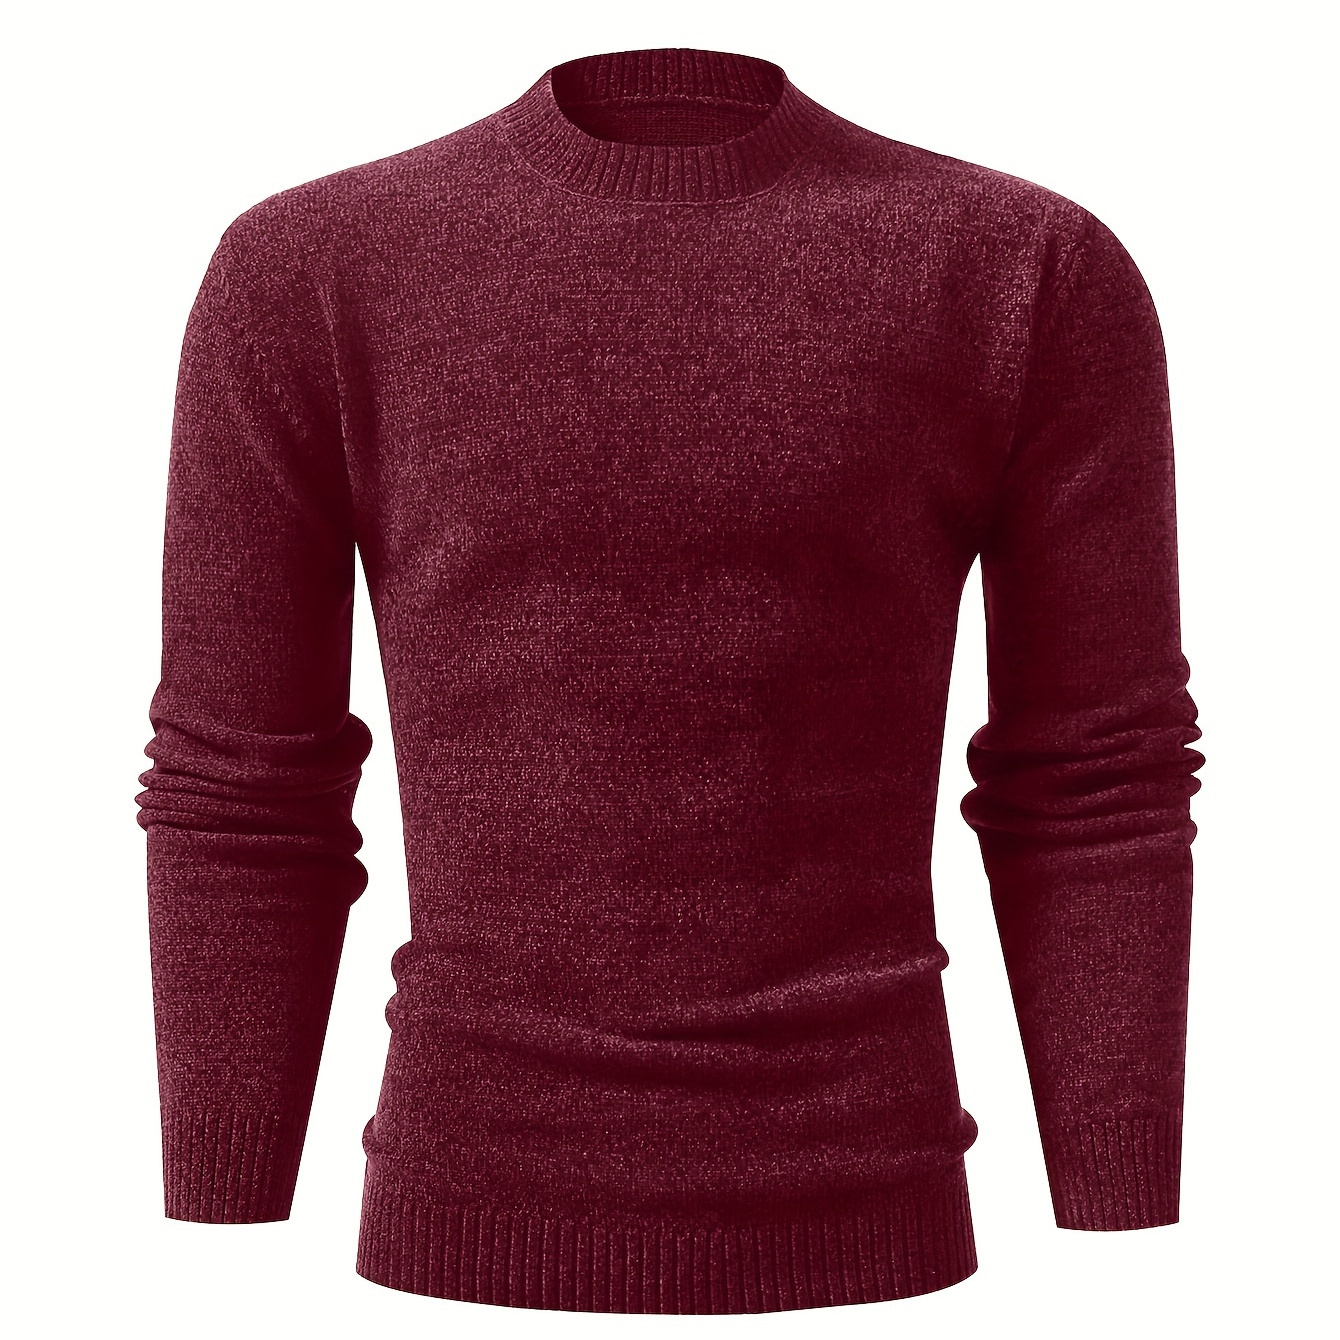 

All Match Knitted Slim Sweater, Men's Casual Warm High Stretch Crew Neck Pullover Sweater For Fall Winter